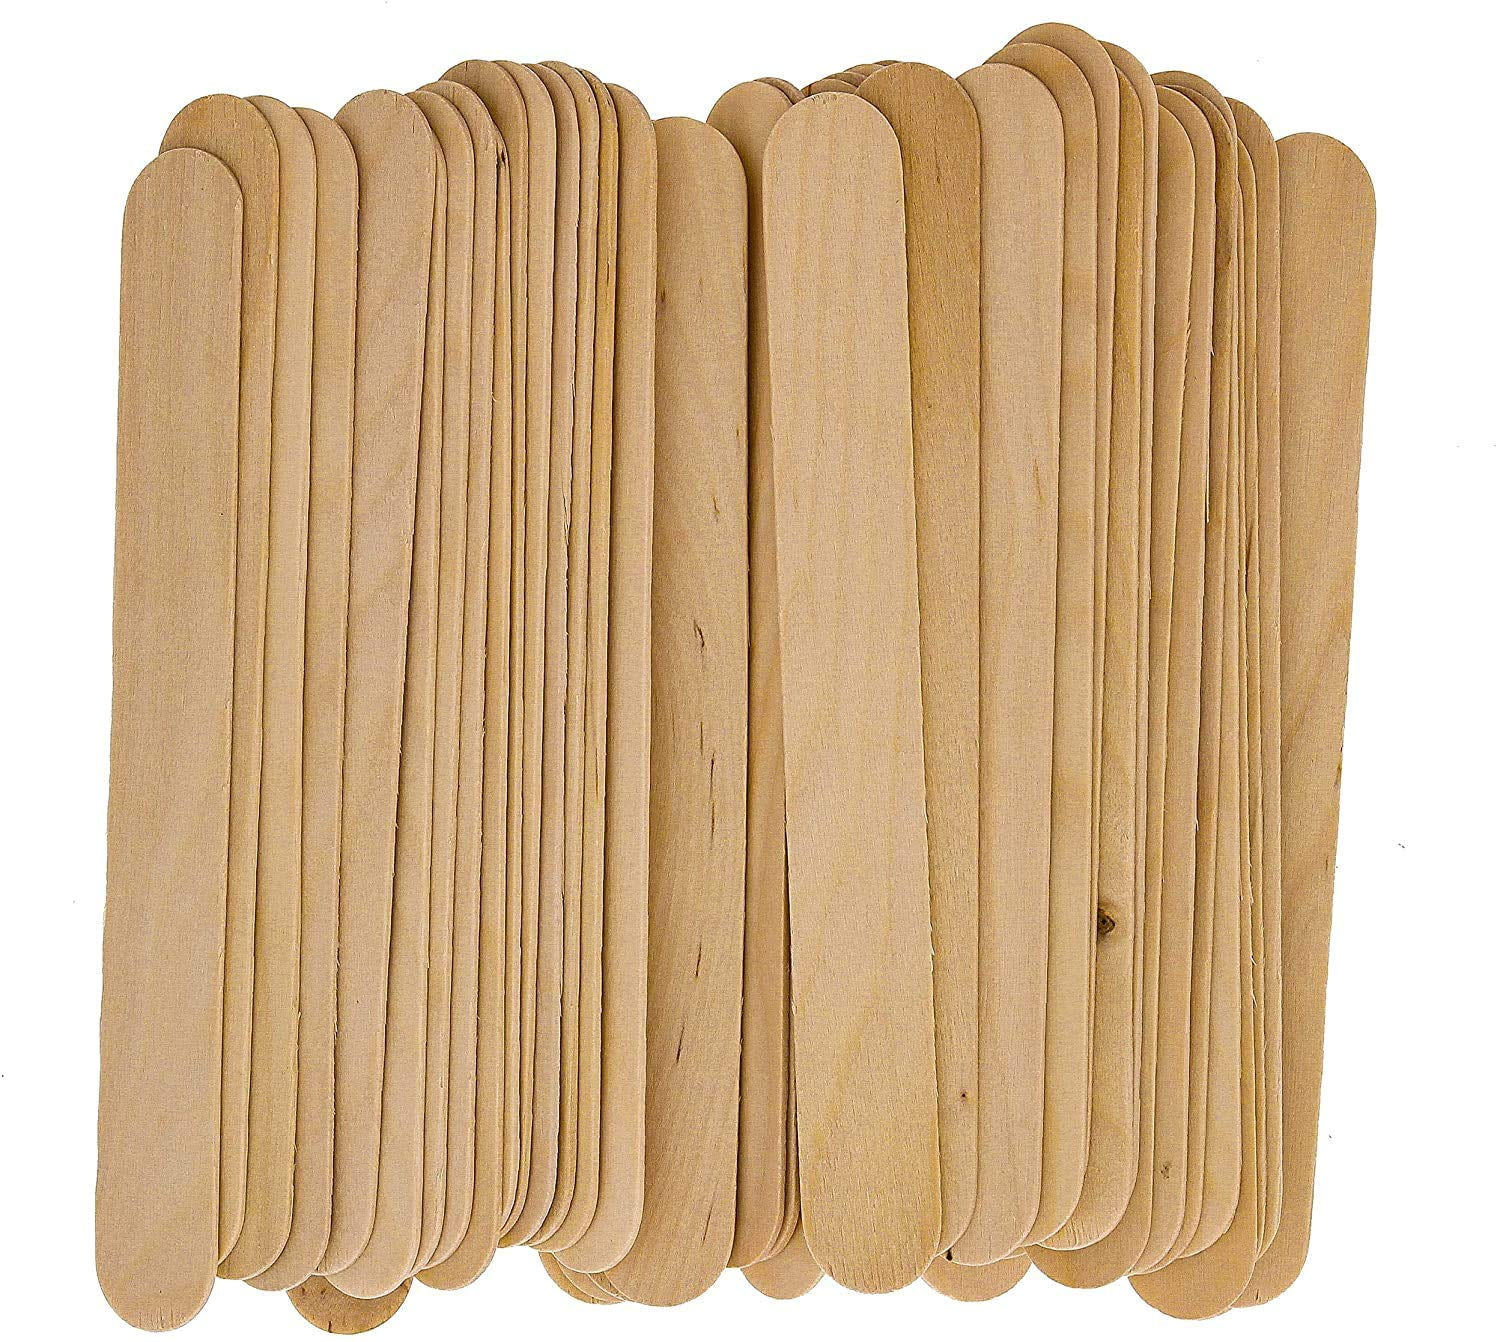 Whaline Wax Spatulas 400 Packs Small Wooden Waxing Applicator Sticks Face &  Eyebrows Hair Removal Sticks